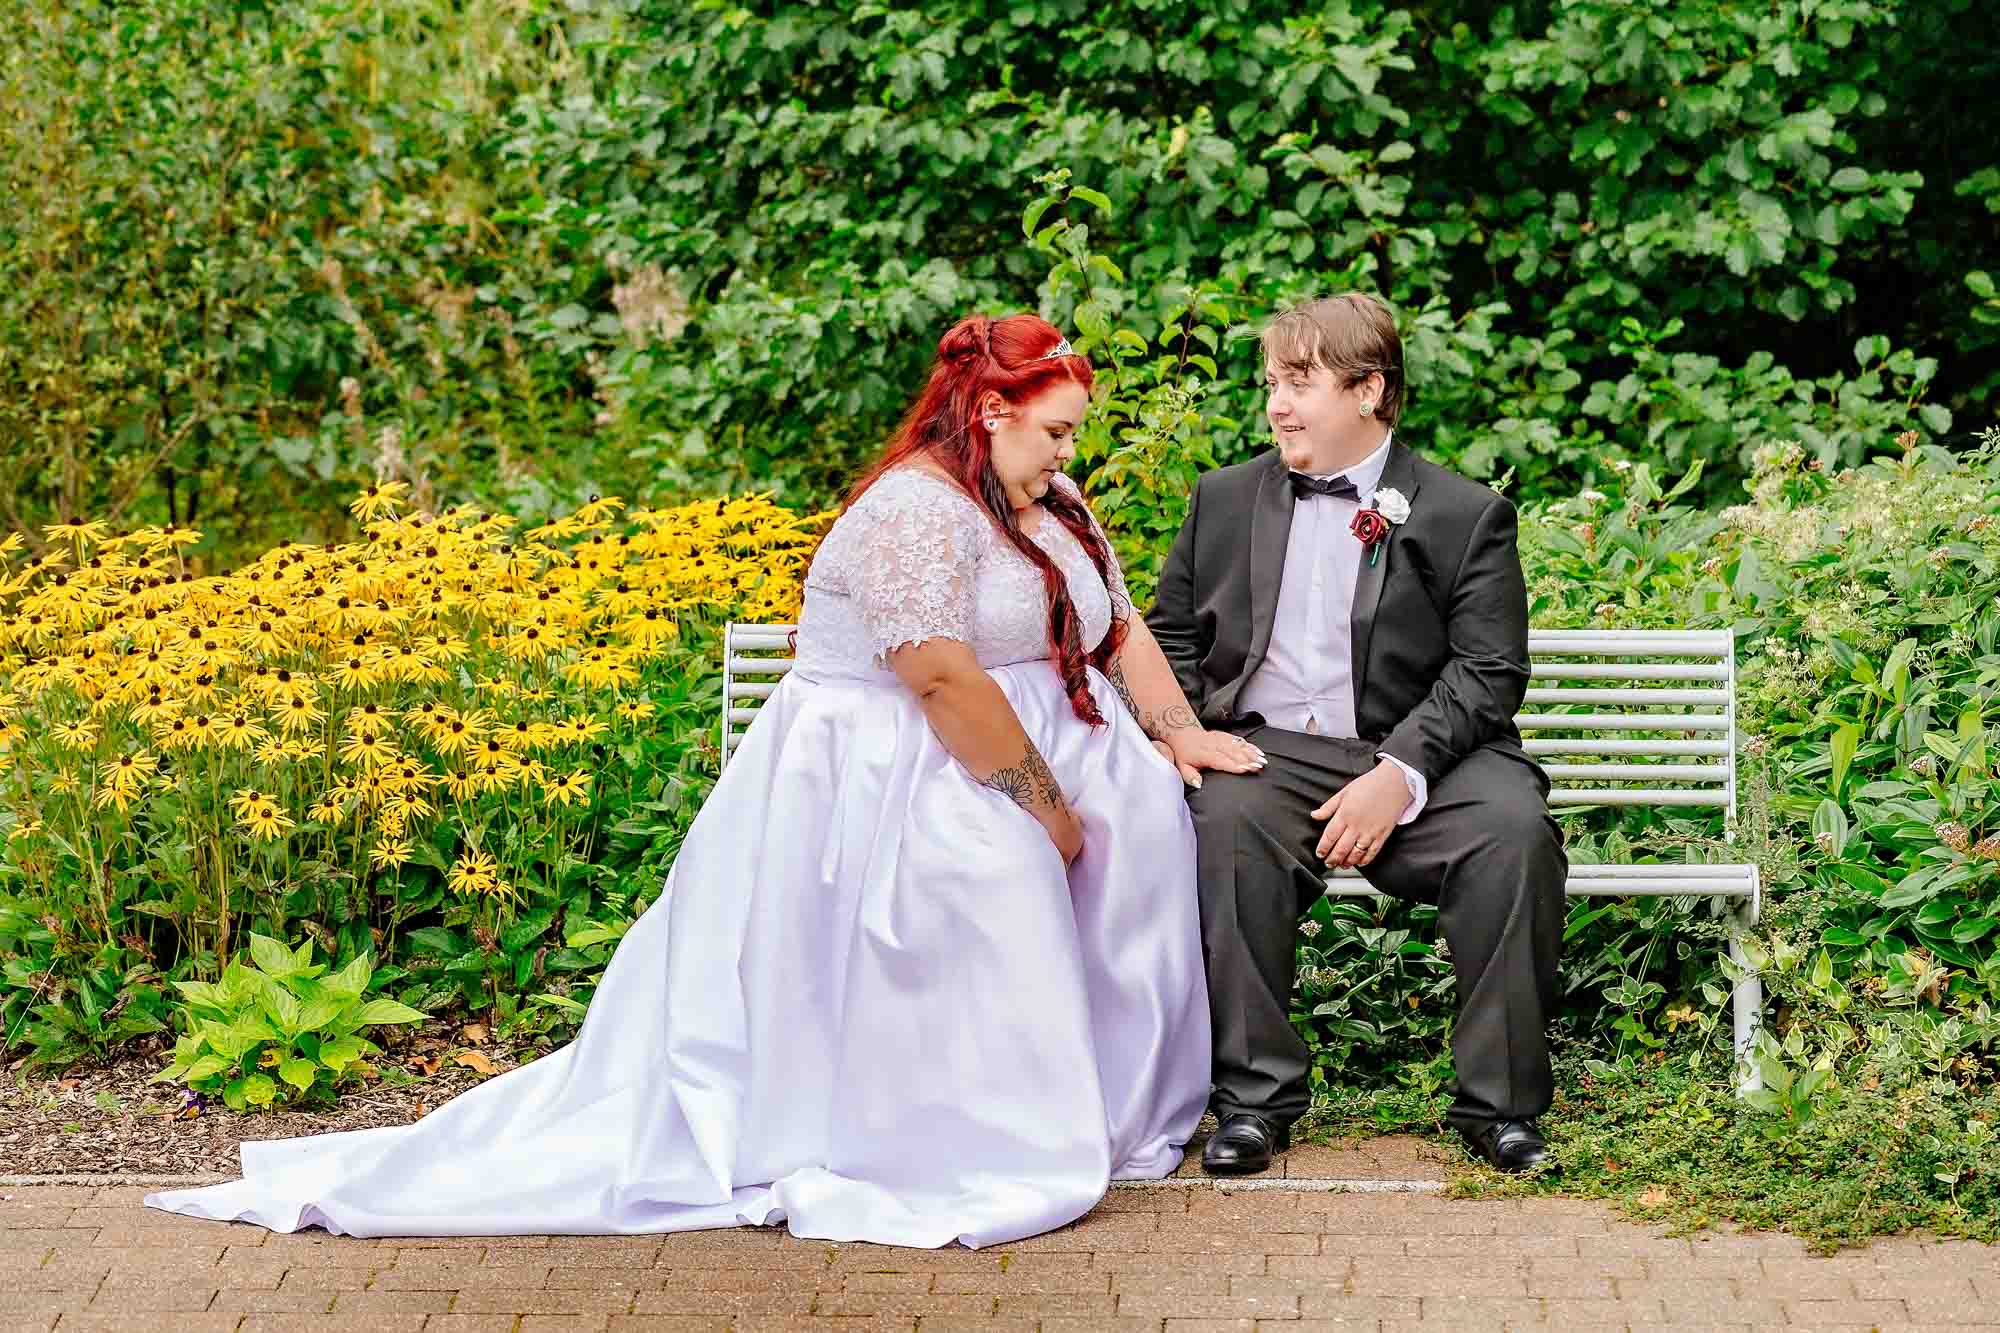 Bride looking down at wedding ring with groom watching her on bench in garden of Penallta House